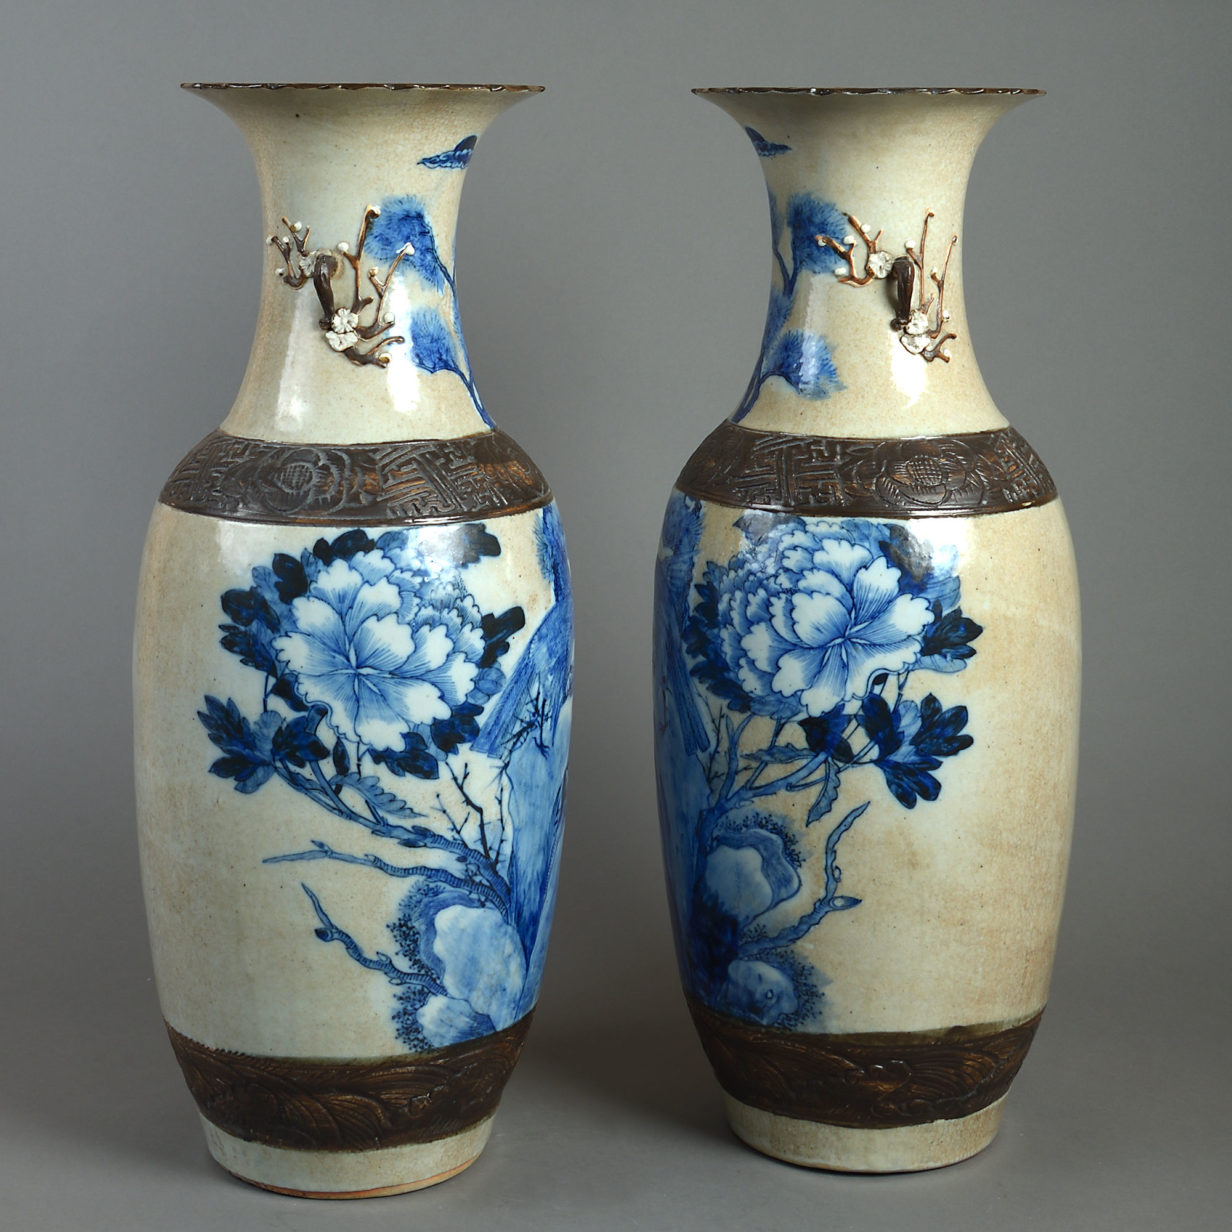 19th century large scale pair of blue & white and crackle glaze vases